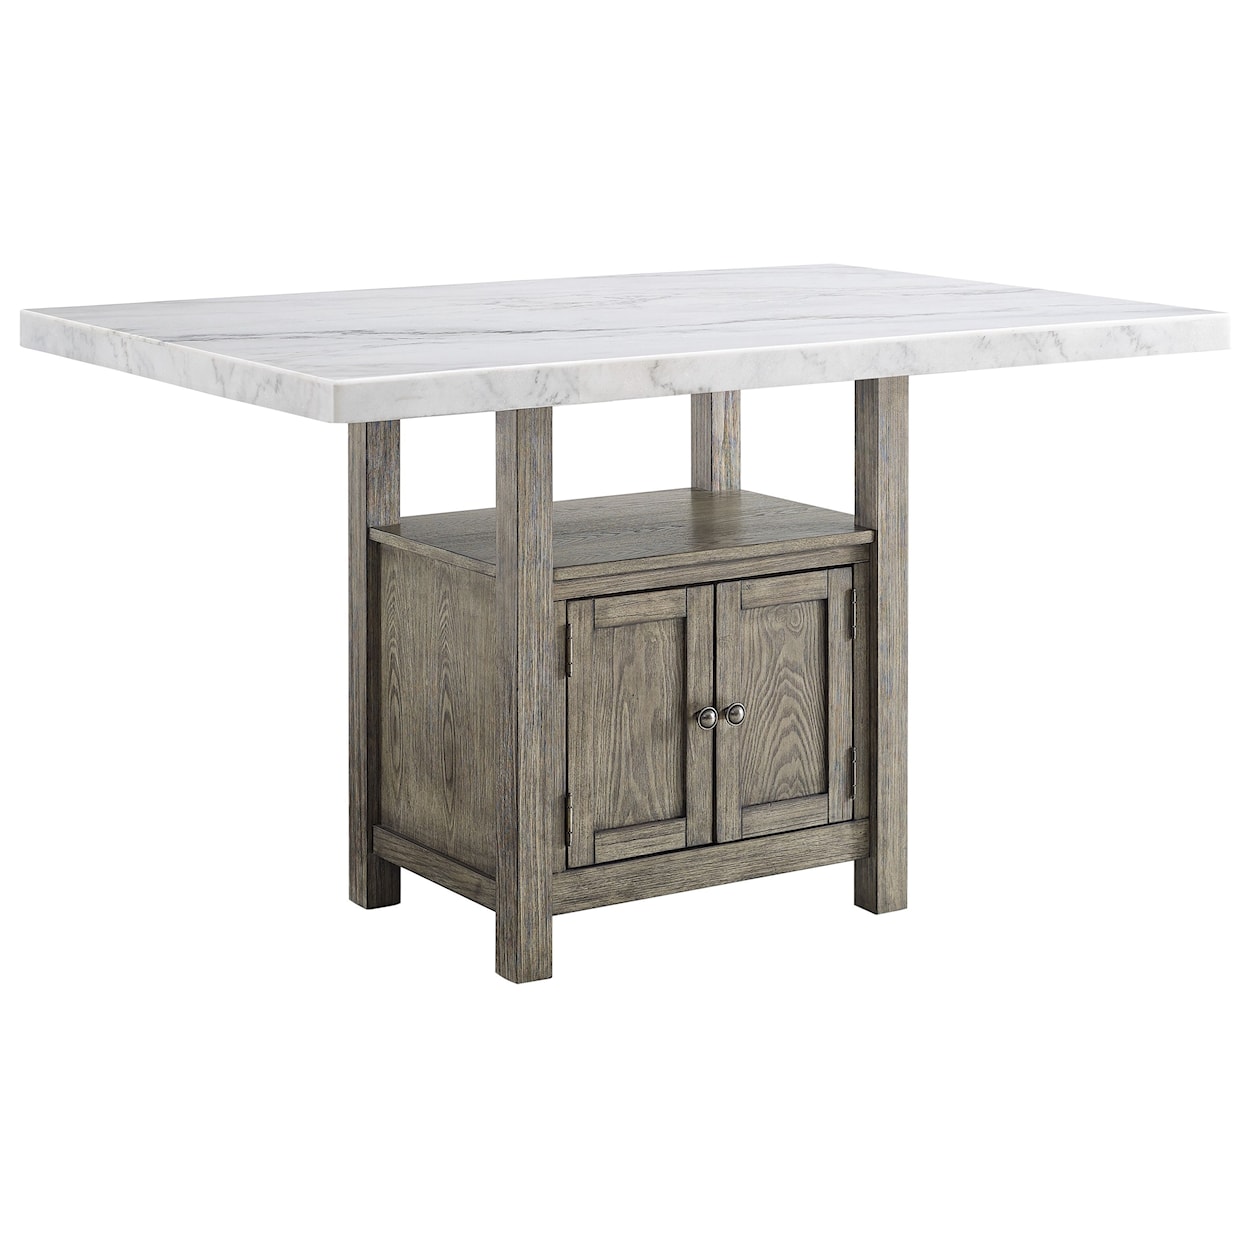 Steve Silver Grayson Counter Height Table